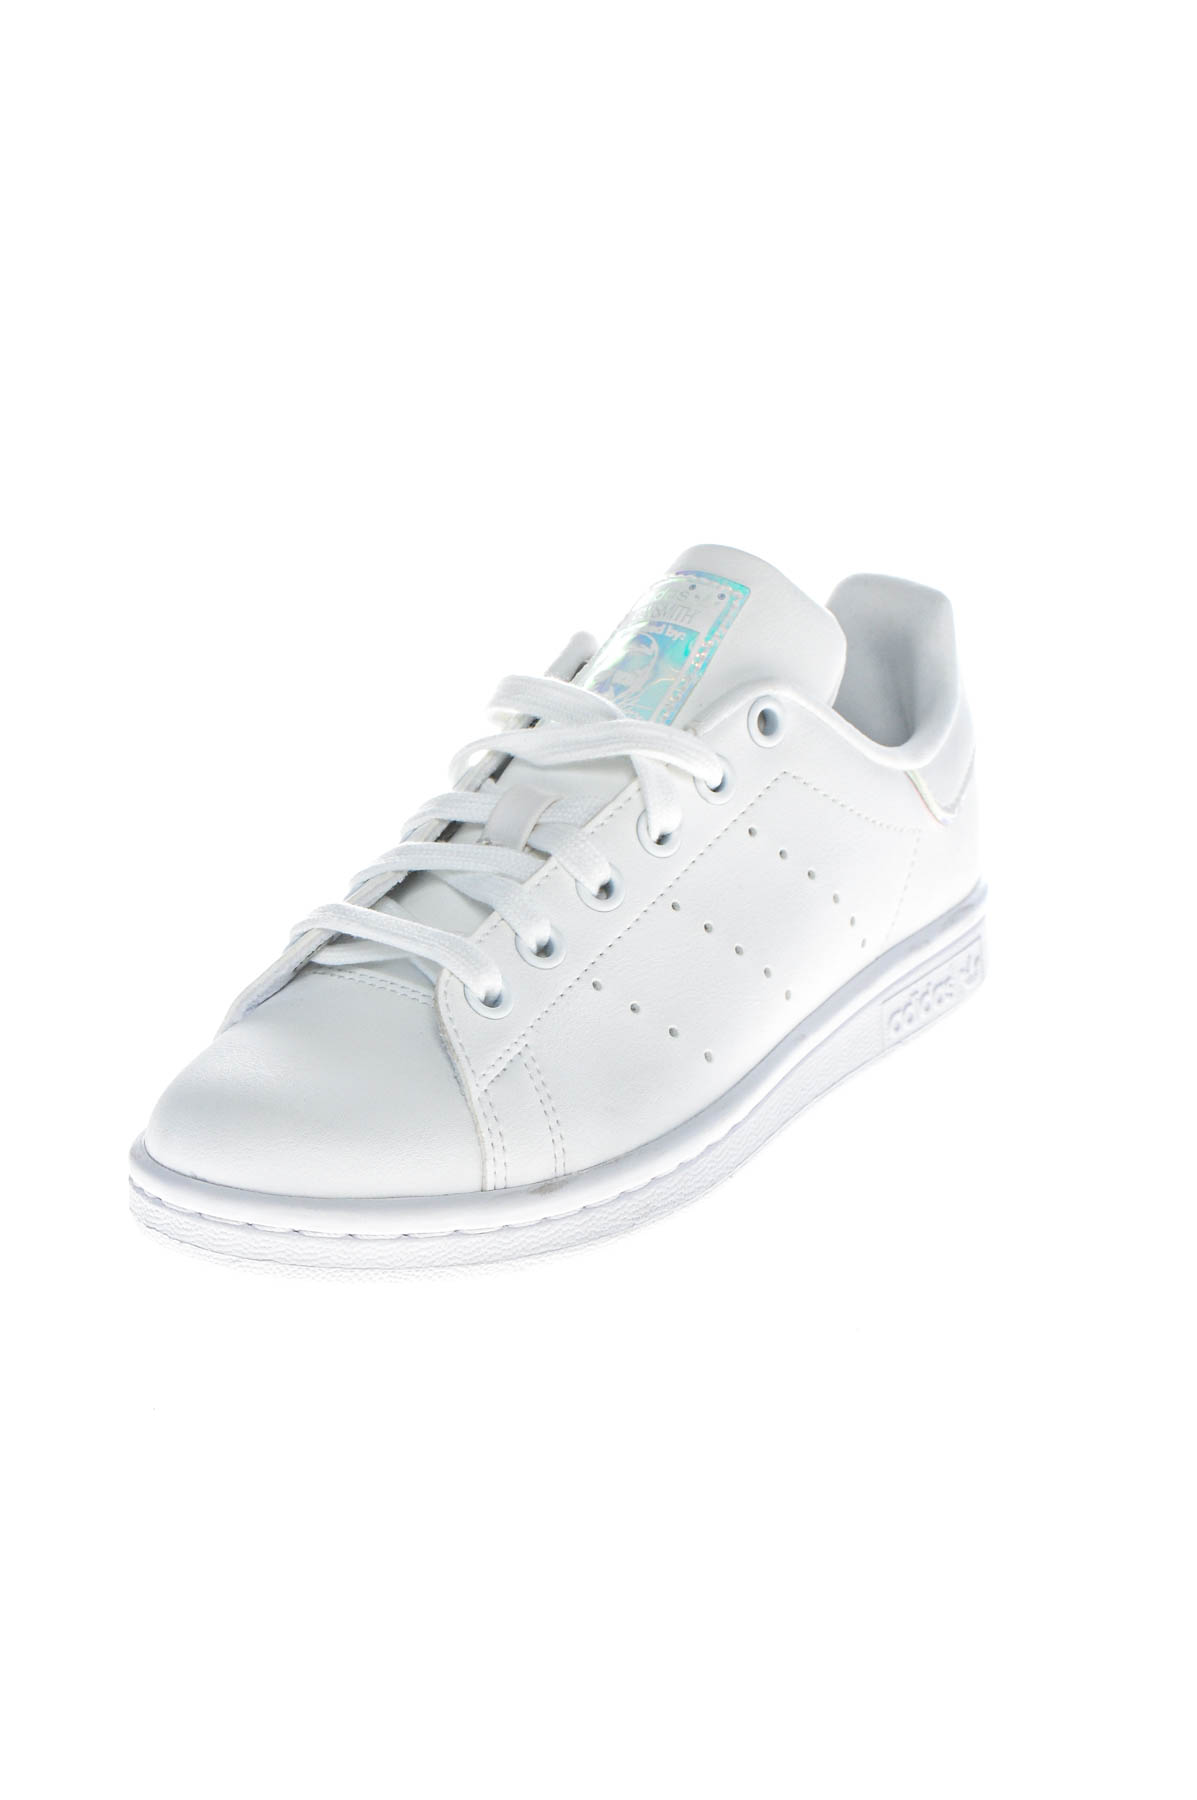 Girl's shoes - Stan Smith x Adidas - 1